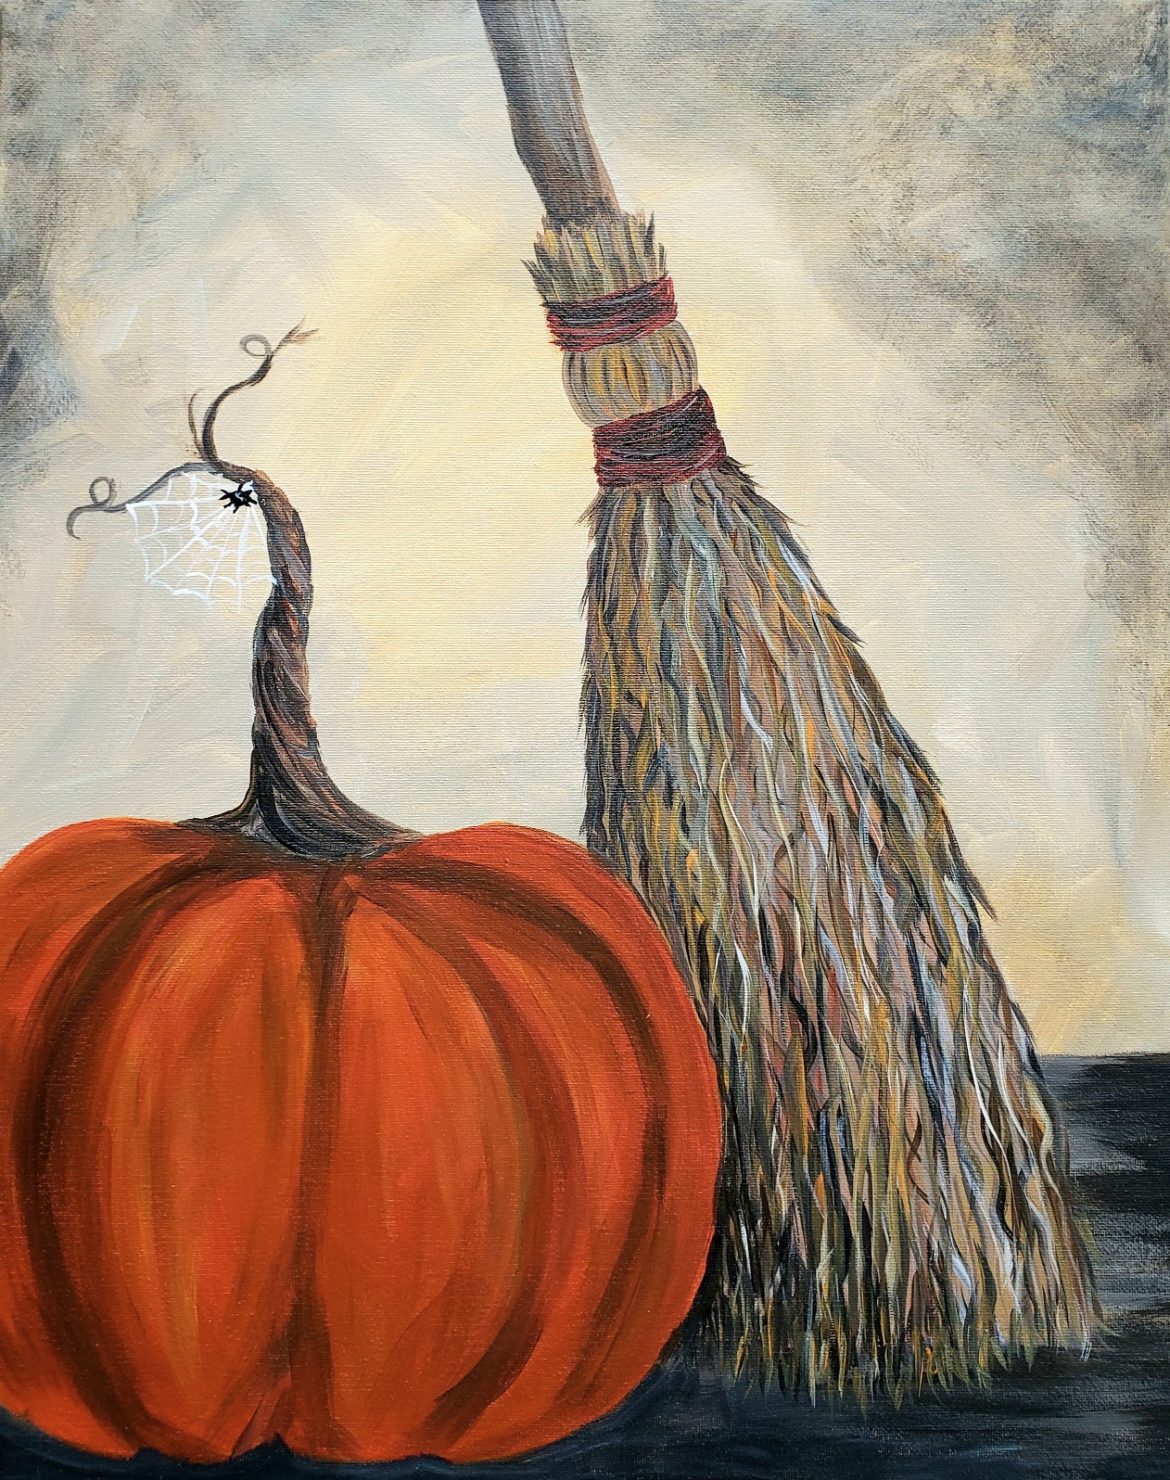 Broom and Pumpkin at the Paint Shack in Eau Claire